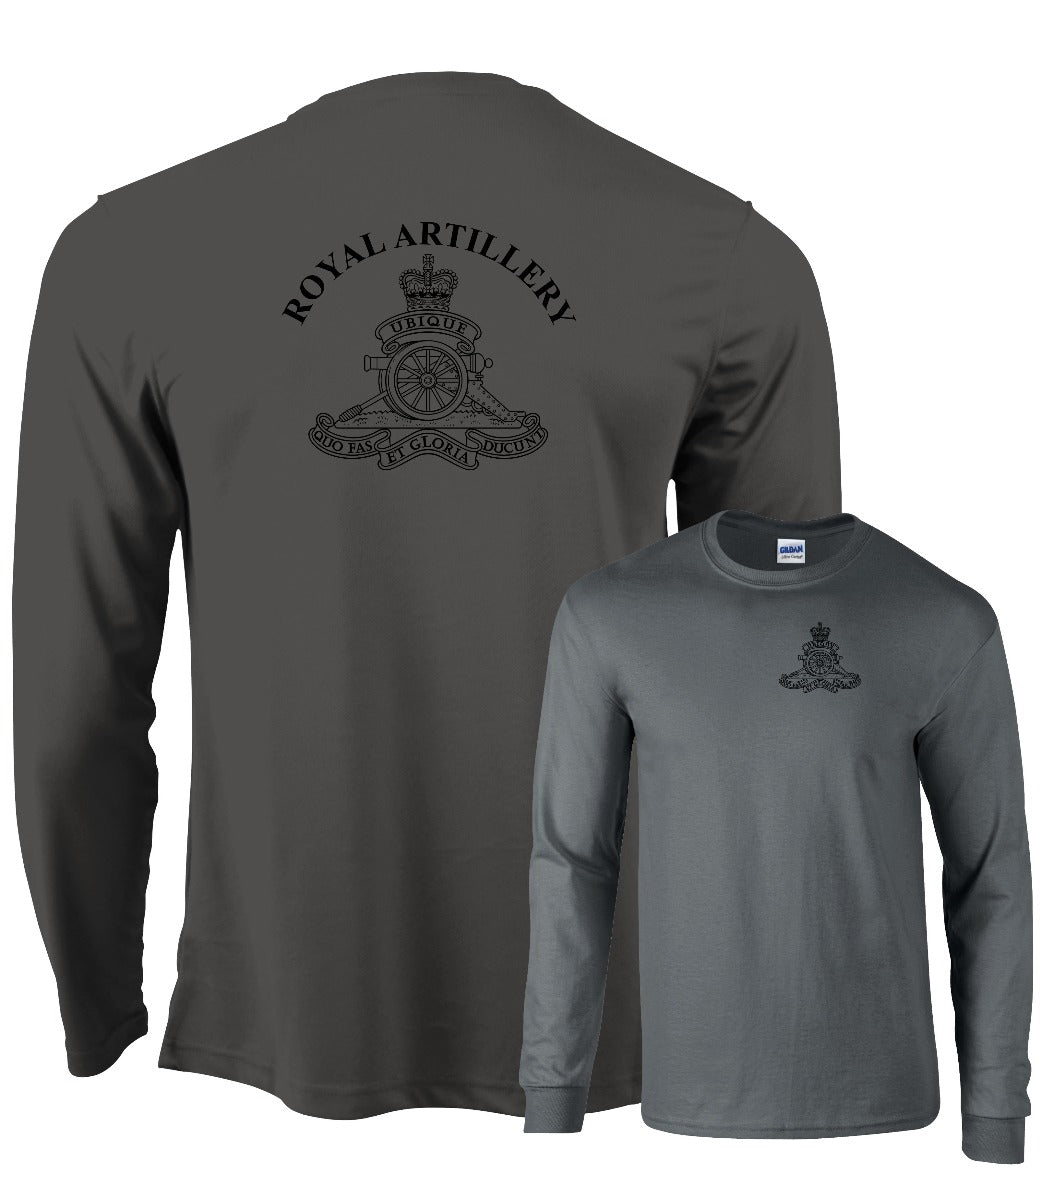 Double Printed Royal Artillery Long sleeve Wicking T-Shirt